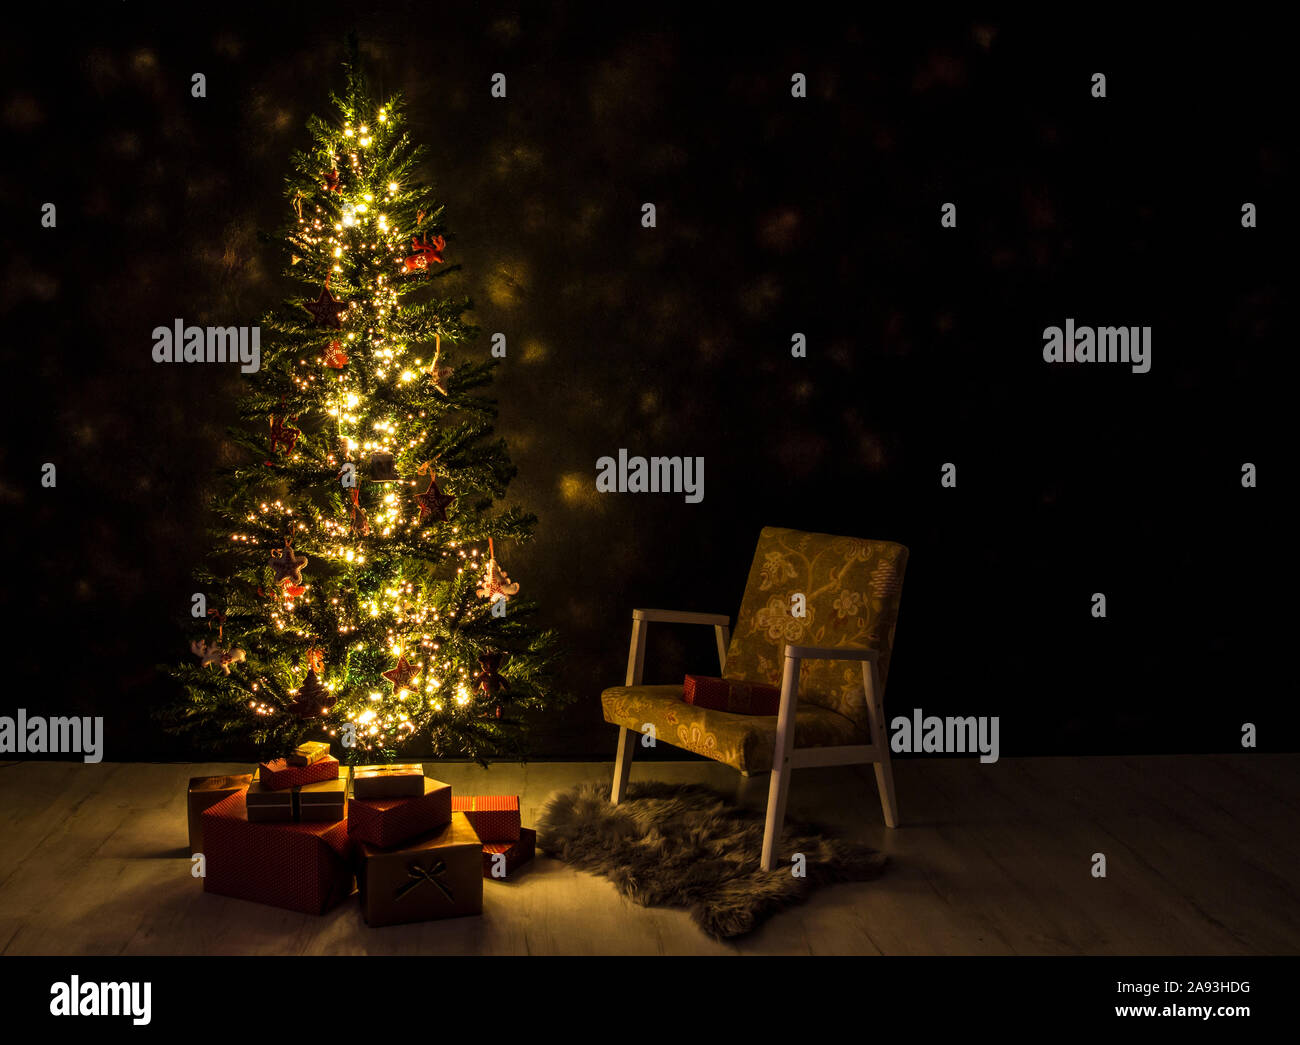 Decorated magical Christmas tree in front of black wall with Christmas red paper wrapped presents under the tree, retro chair next to it. Night. Stock Photo